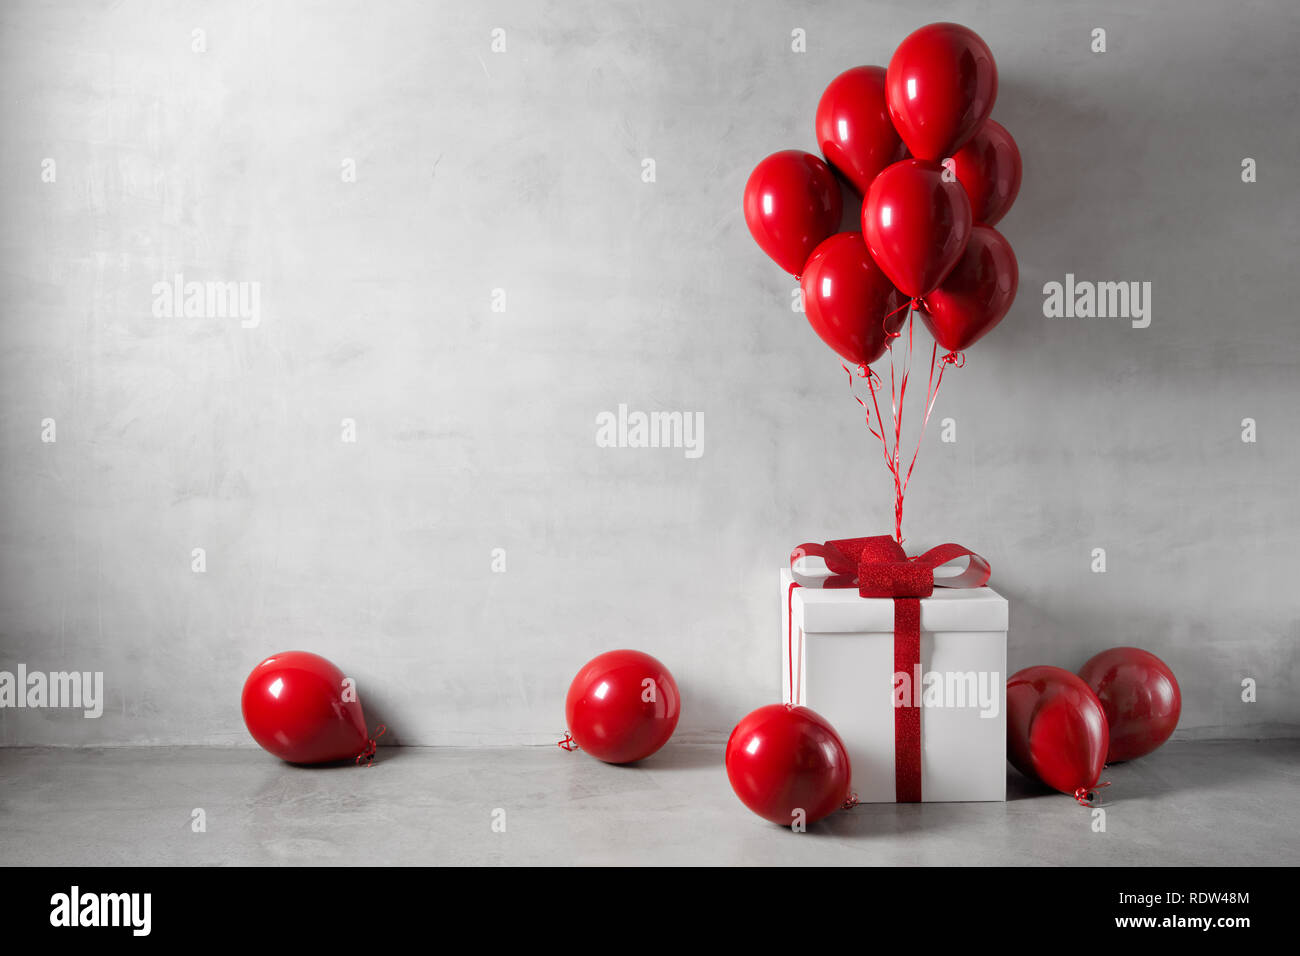 Red balloons and white gift box on concrete wall background Stock Photo